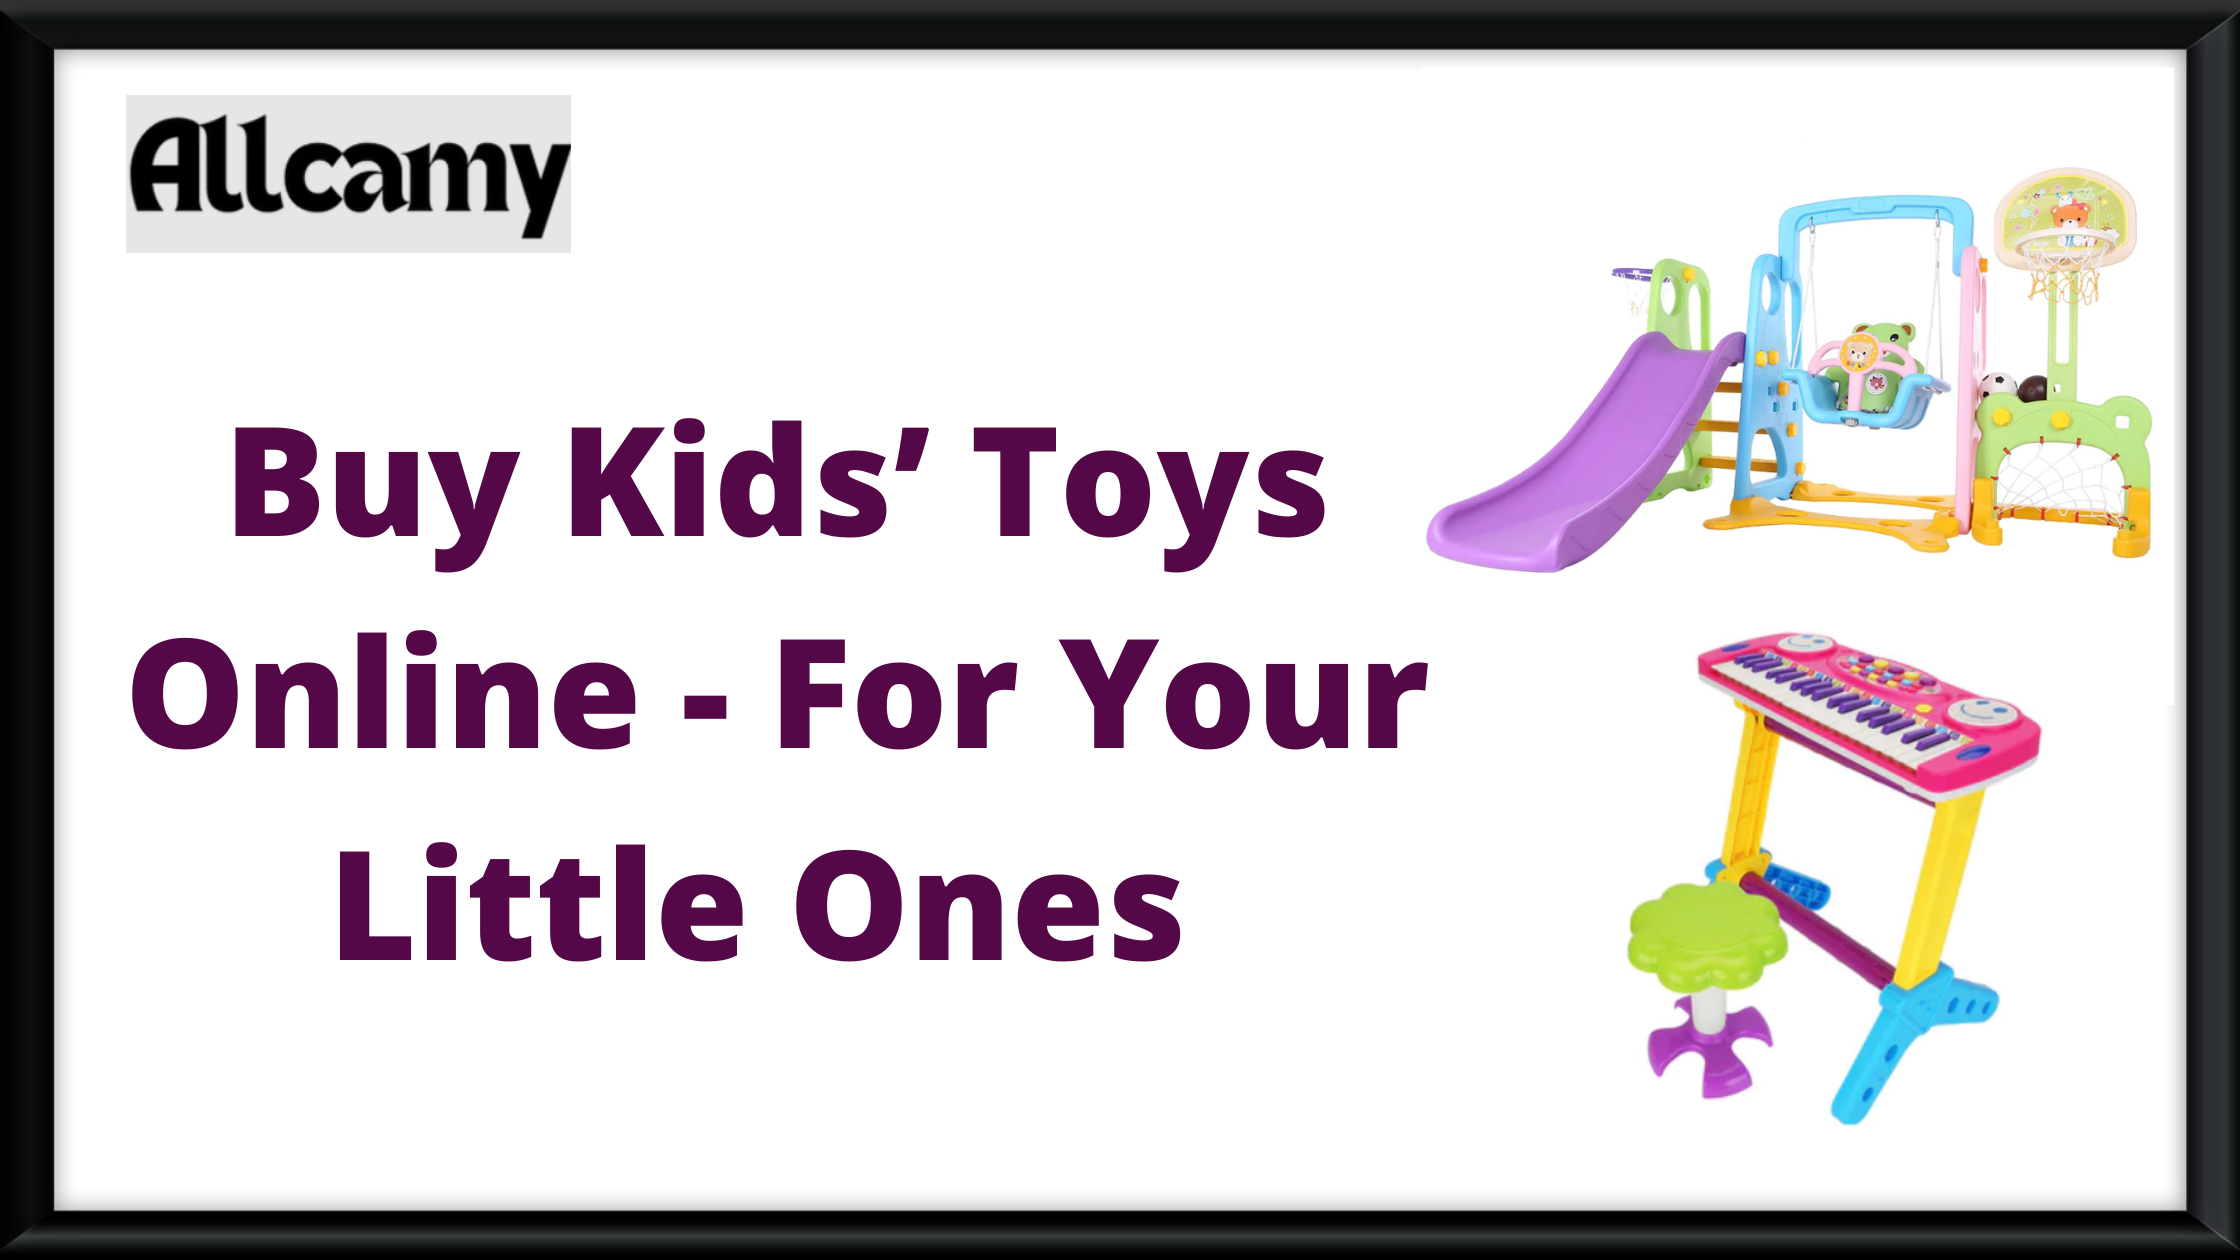 Buy Kids’ Toys Online - For Your Little Ones -5dfda7e5